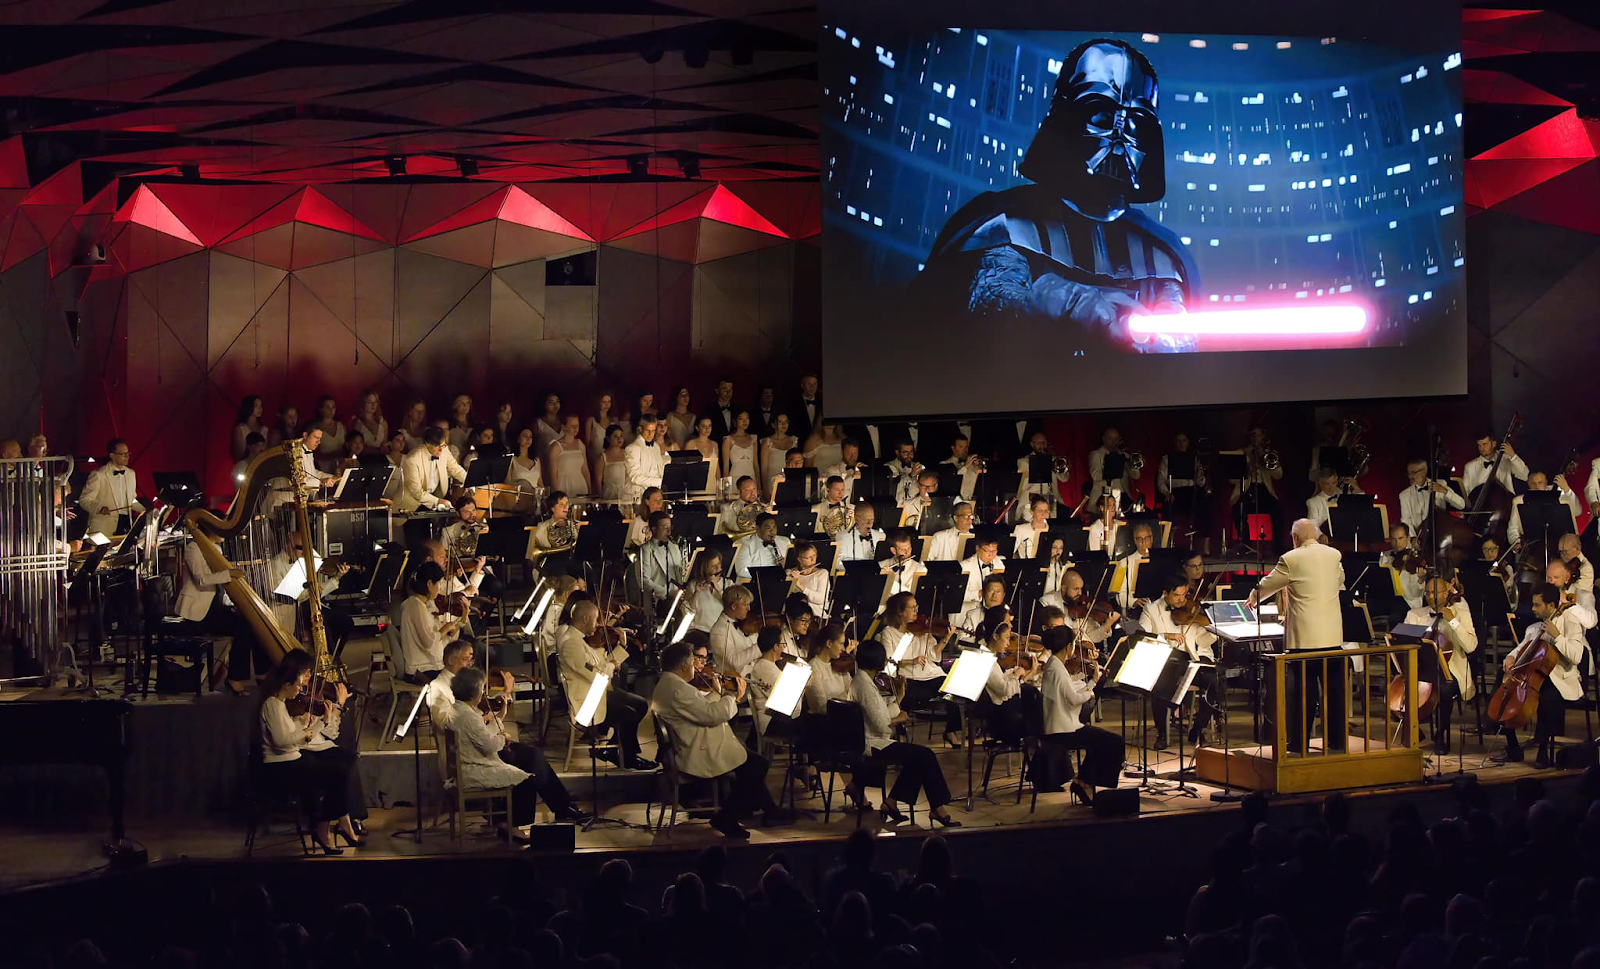 An orchestra plays underneath a large screen showing scenes of Star Wars movies.